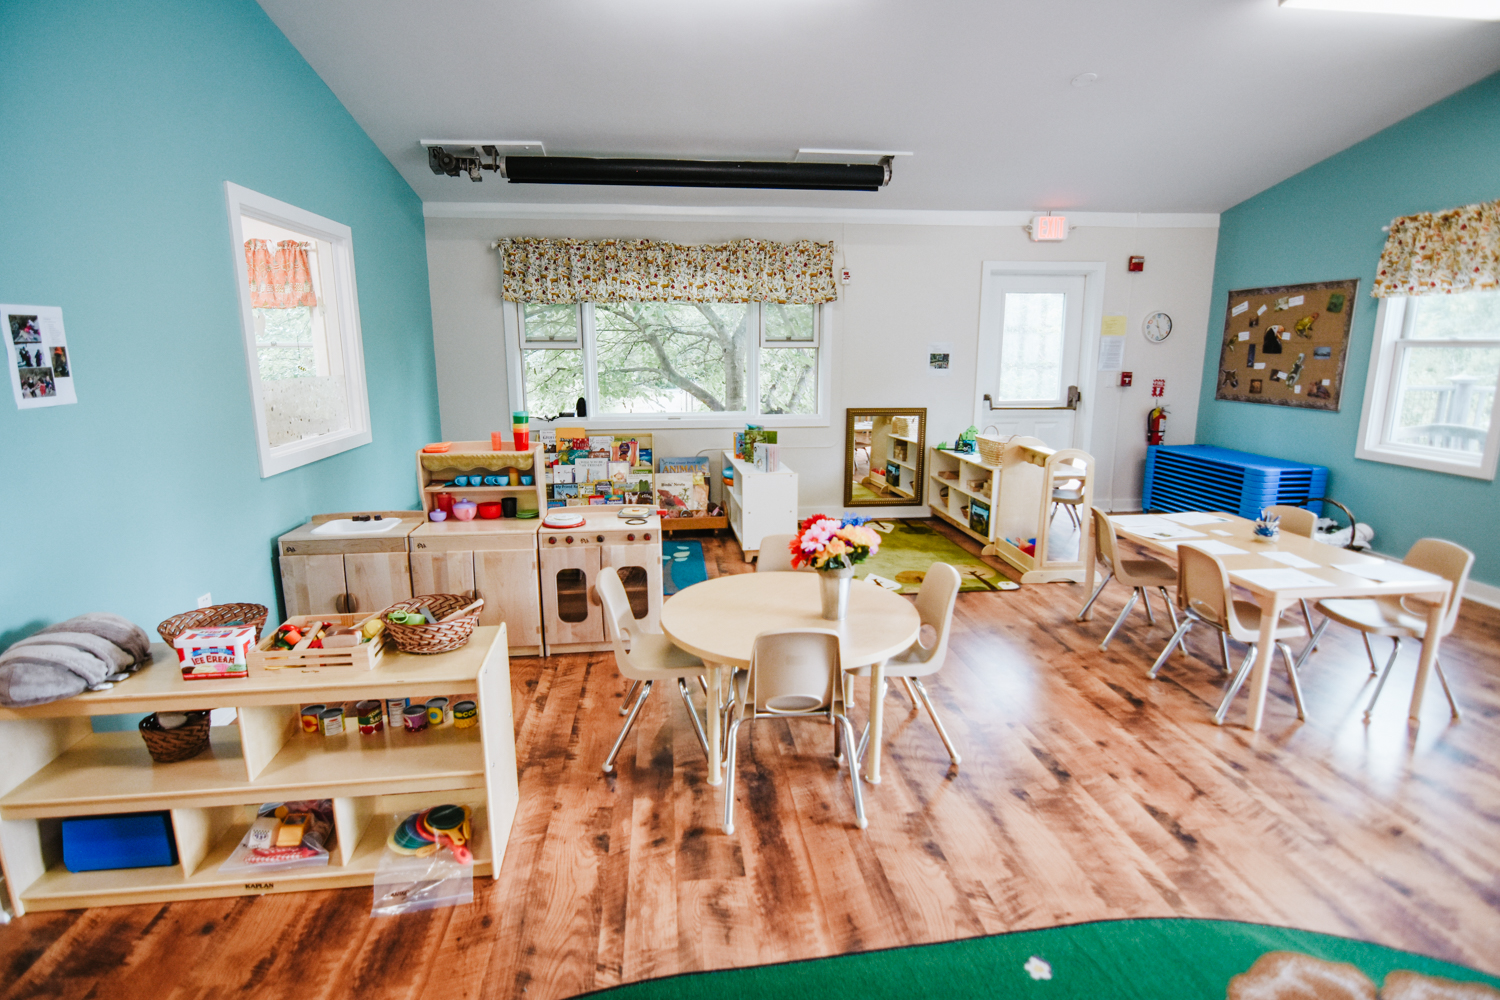 A view of the classroom at Stony Brook including two tables with chairs, play kitchen, blue walls, wood floor